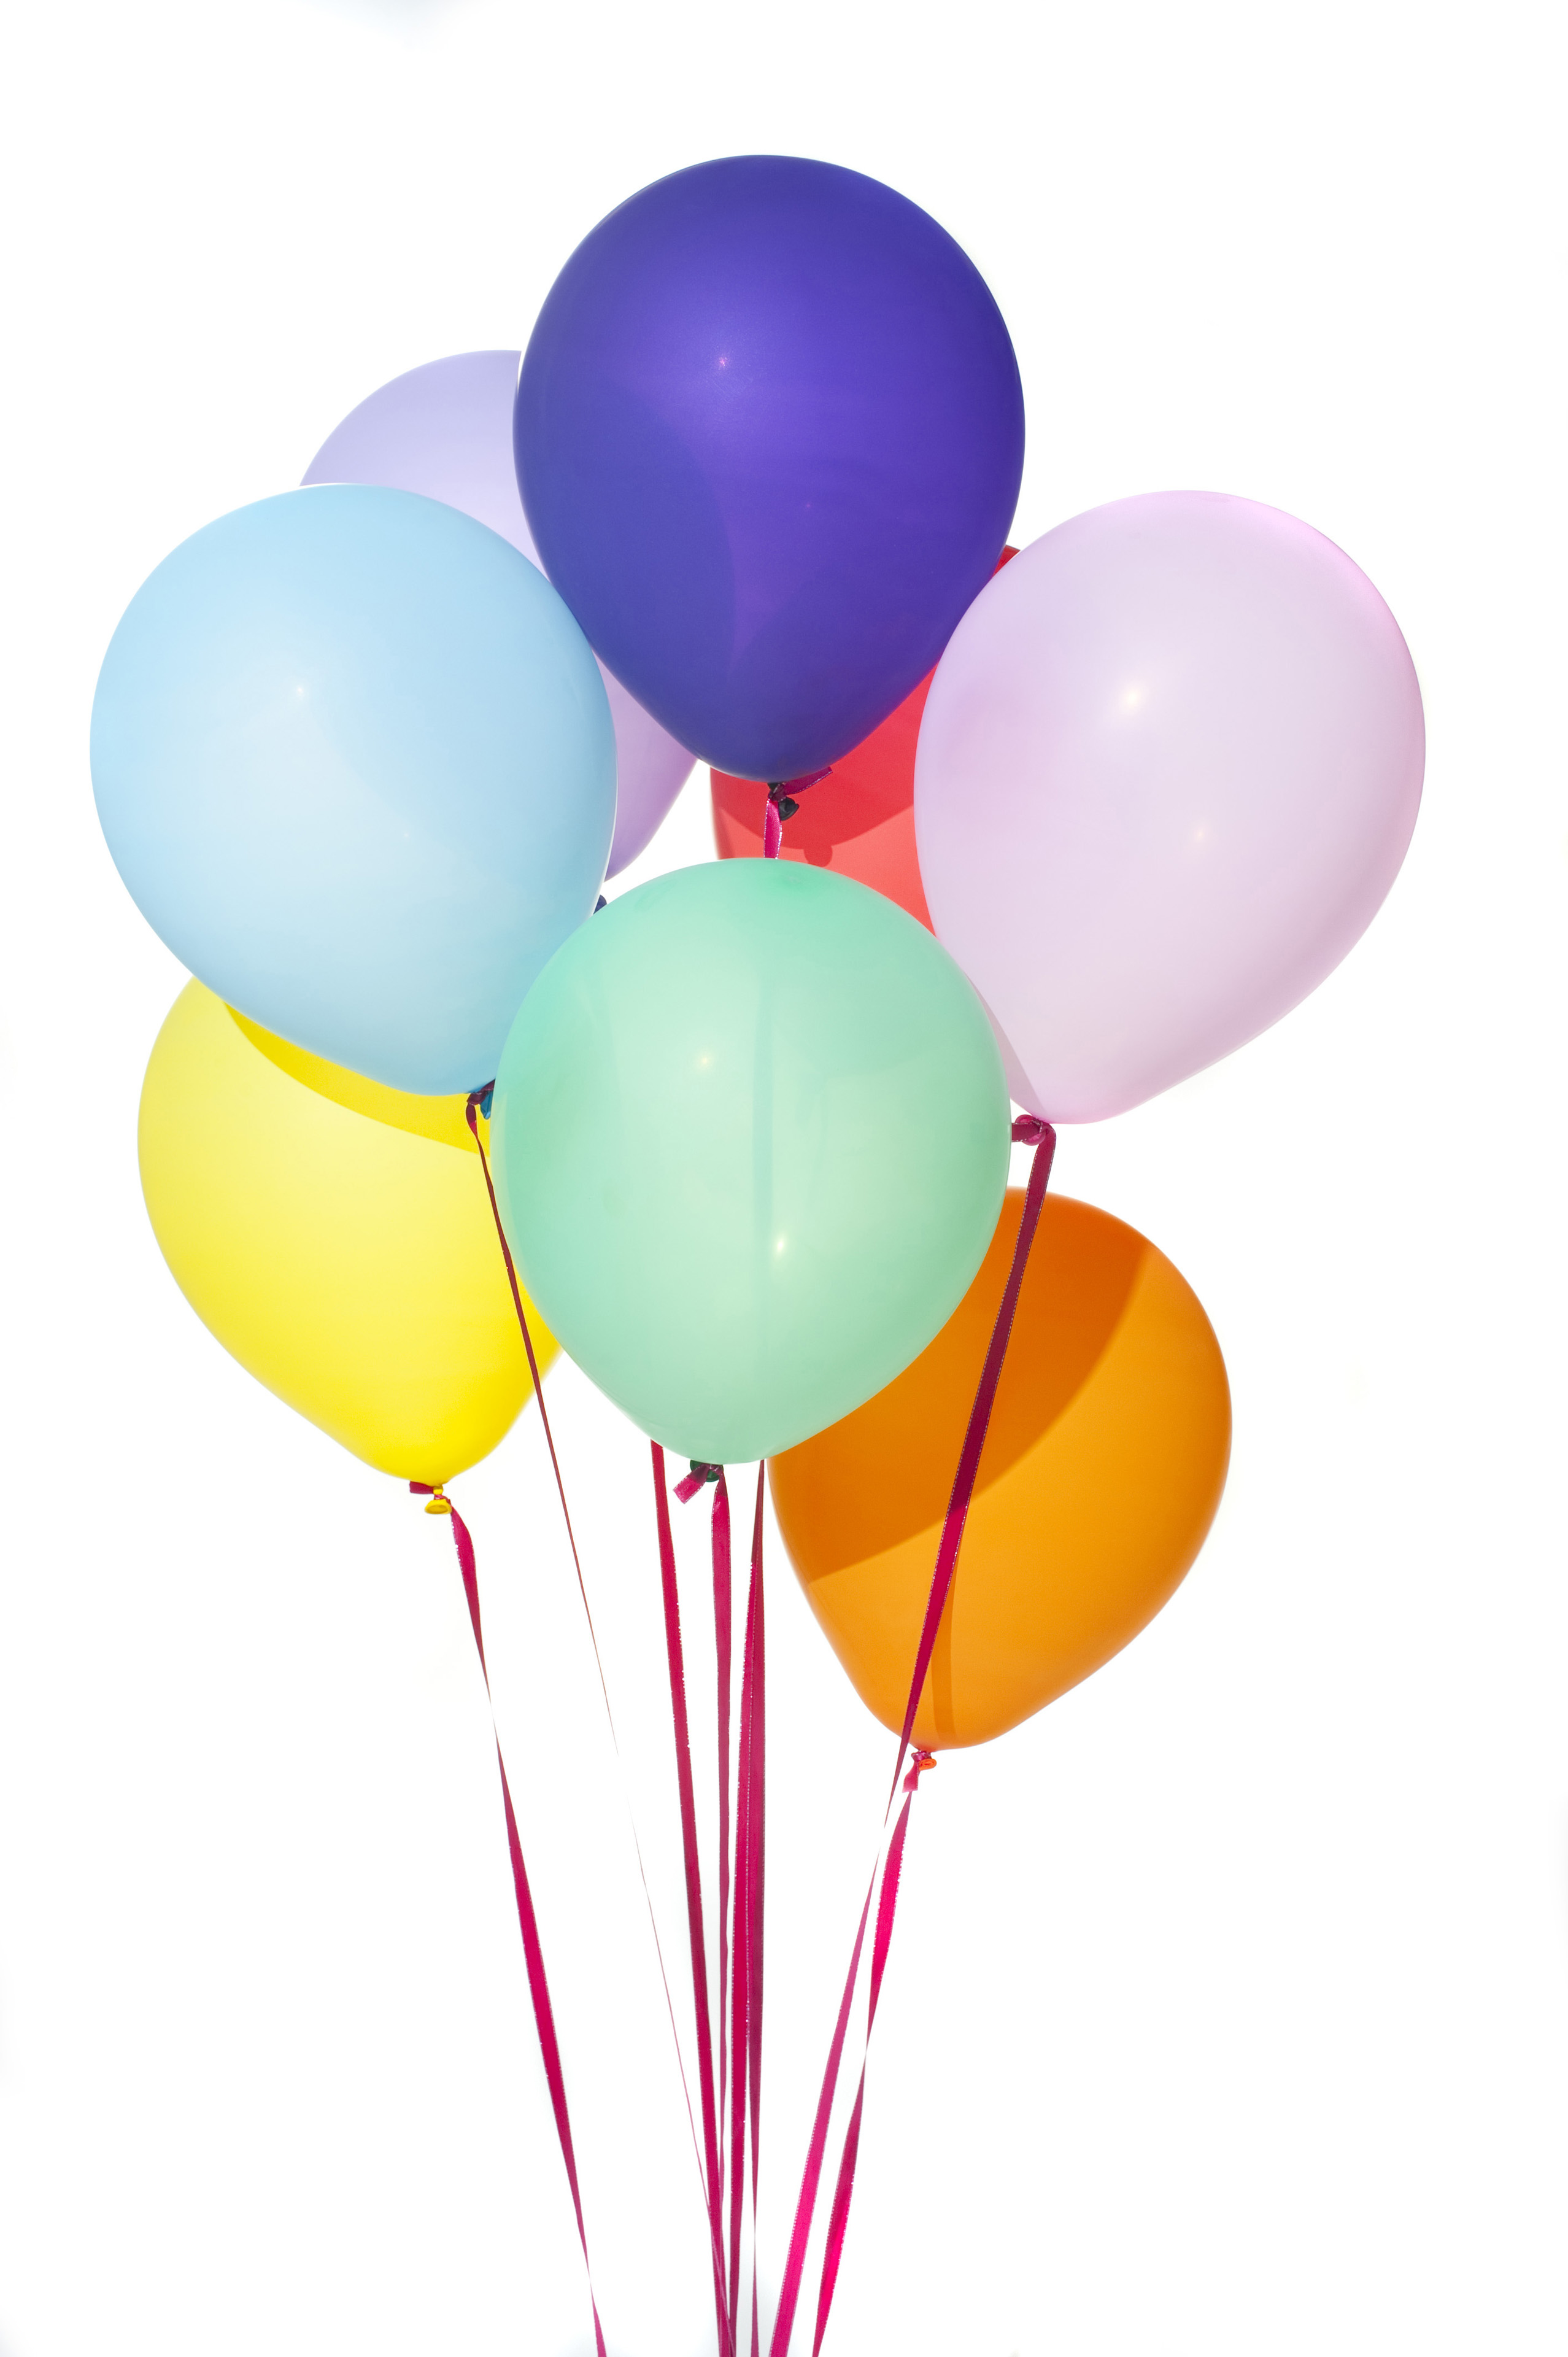 Free Image of Bunch of colorful floating party balloons | Freebie